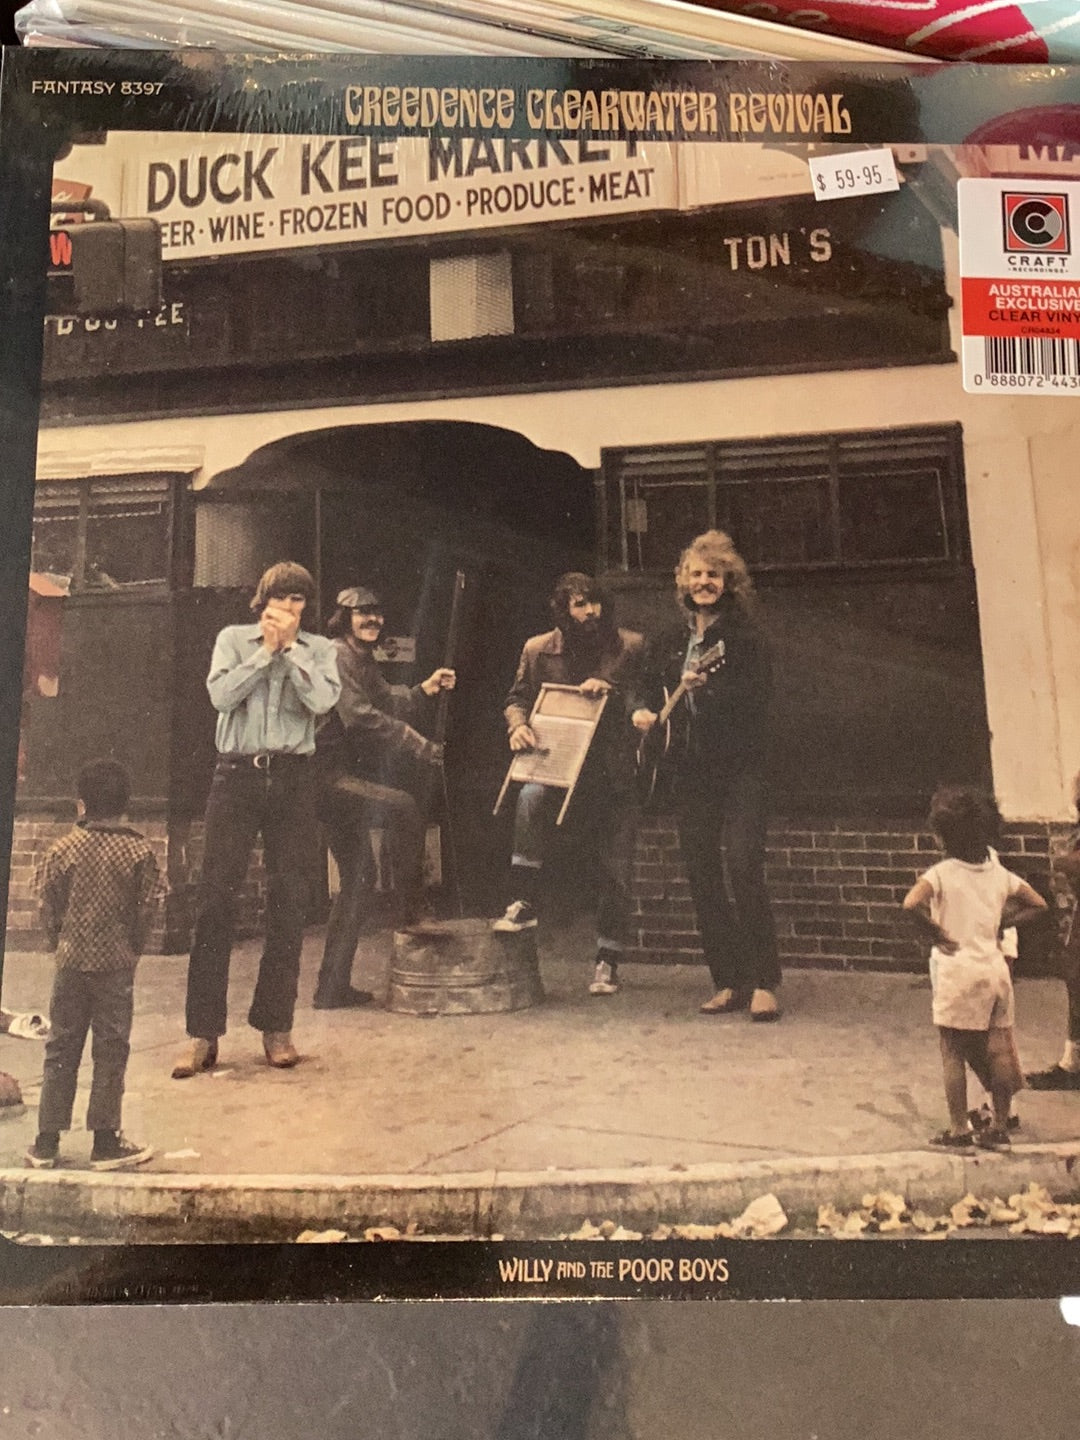 Creedence Clearwater Revival - Willy and the Poor Boys -Colour Vinyl LP